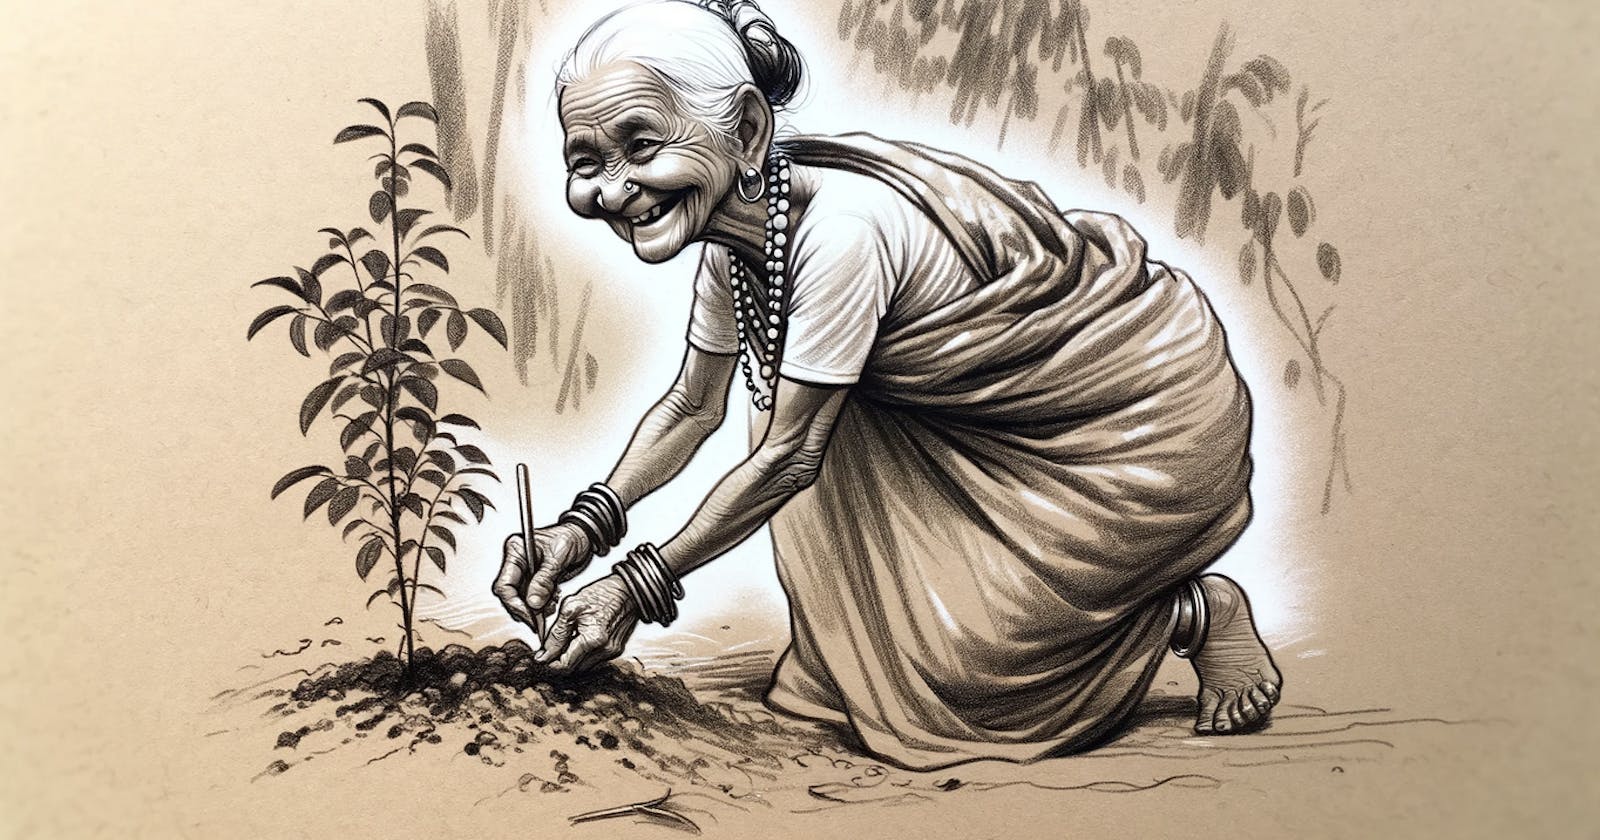 Tulsi Gowda: The Forest's Encyclopedia